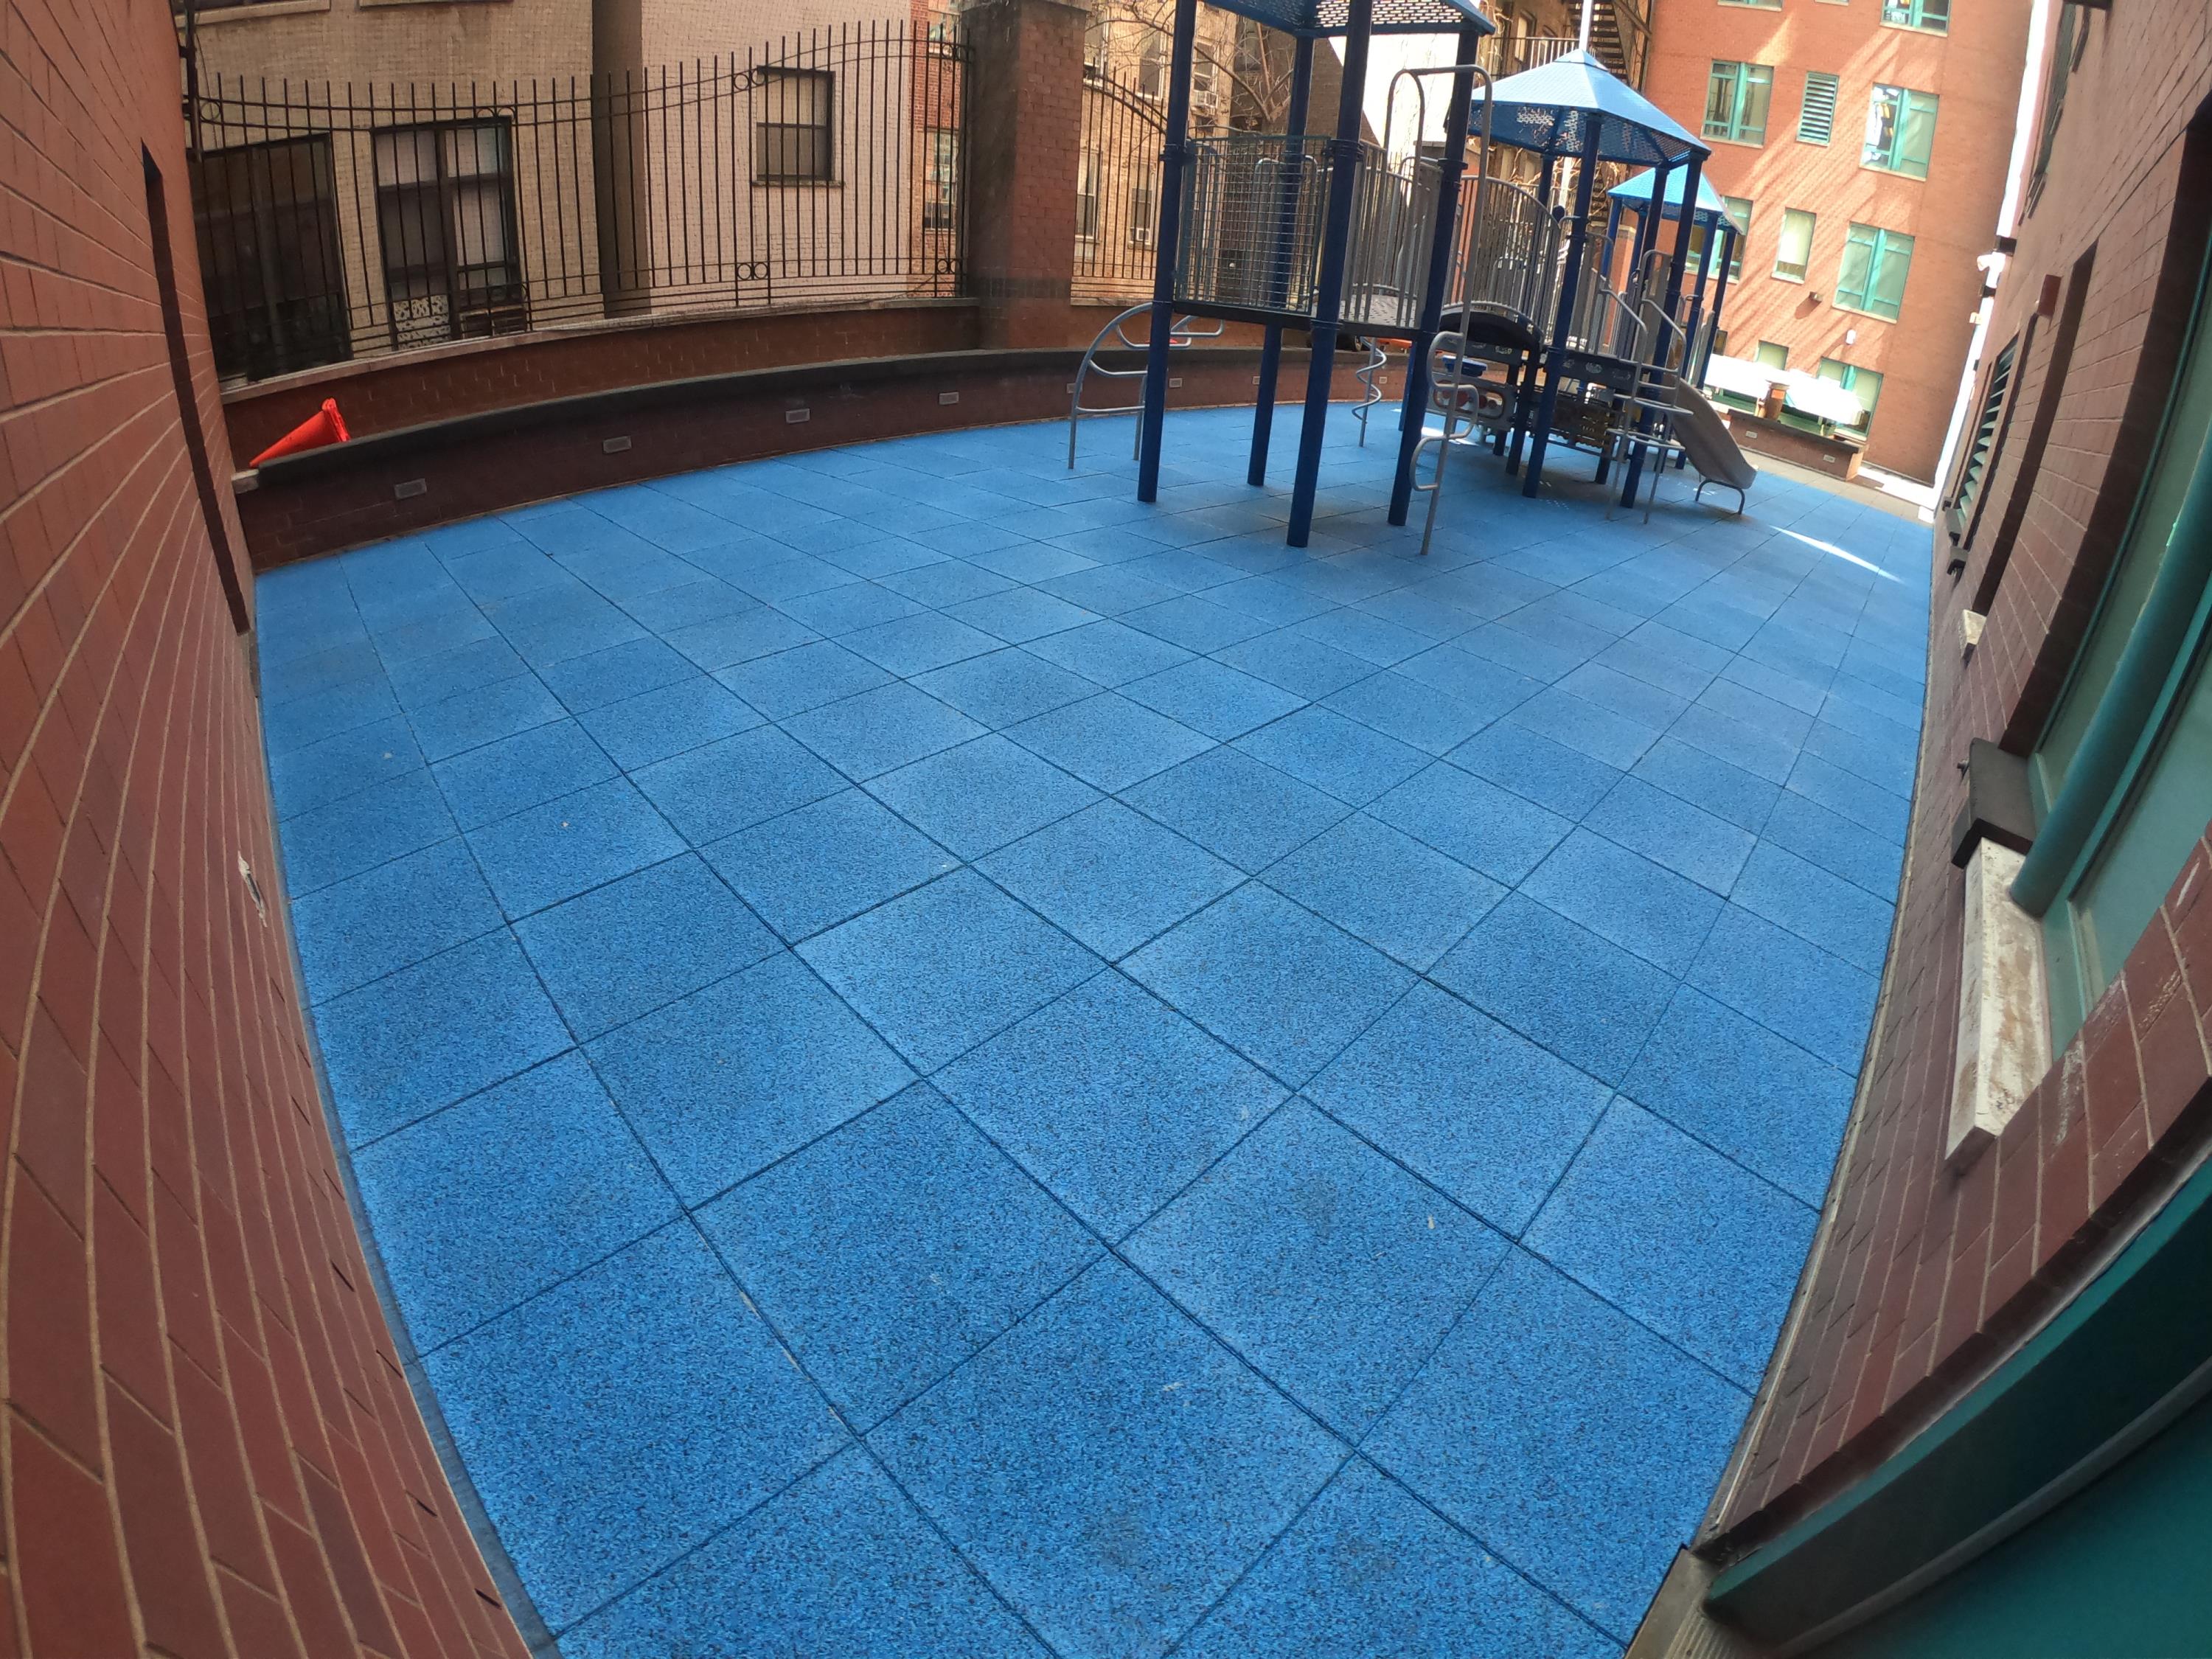 UNITY Surfacing - 2in TPV Top Tiles on SCA Rooftop Playground in NYC (1b)